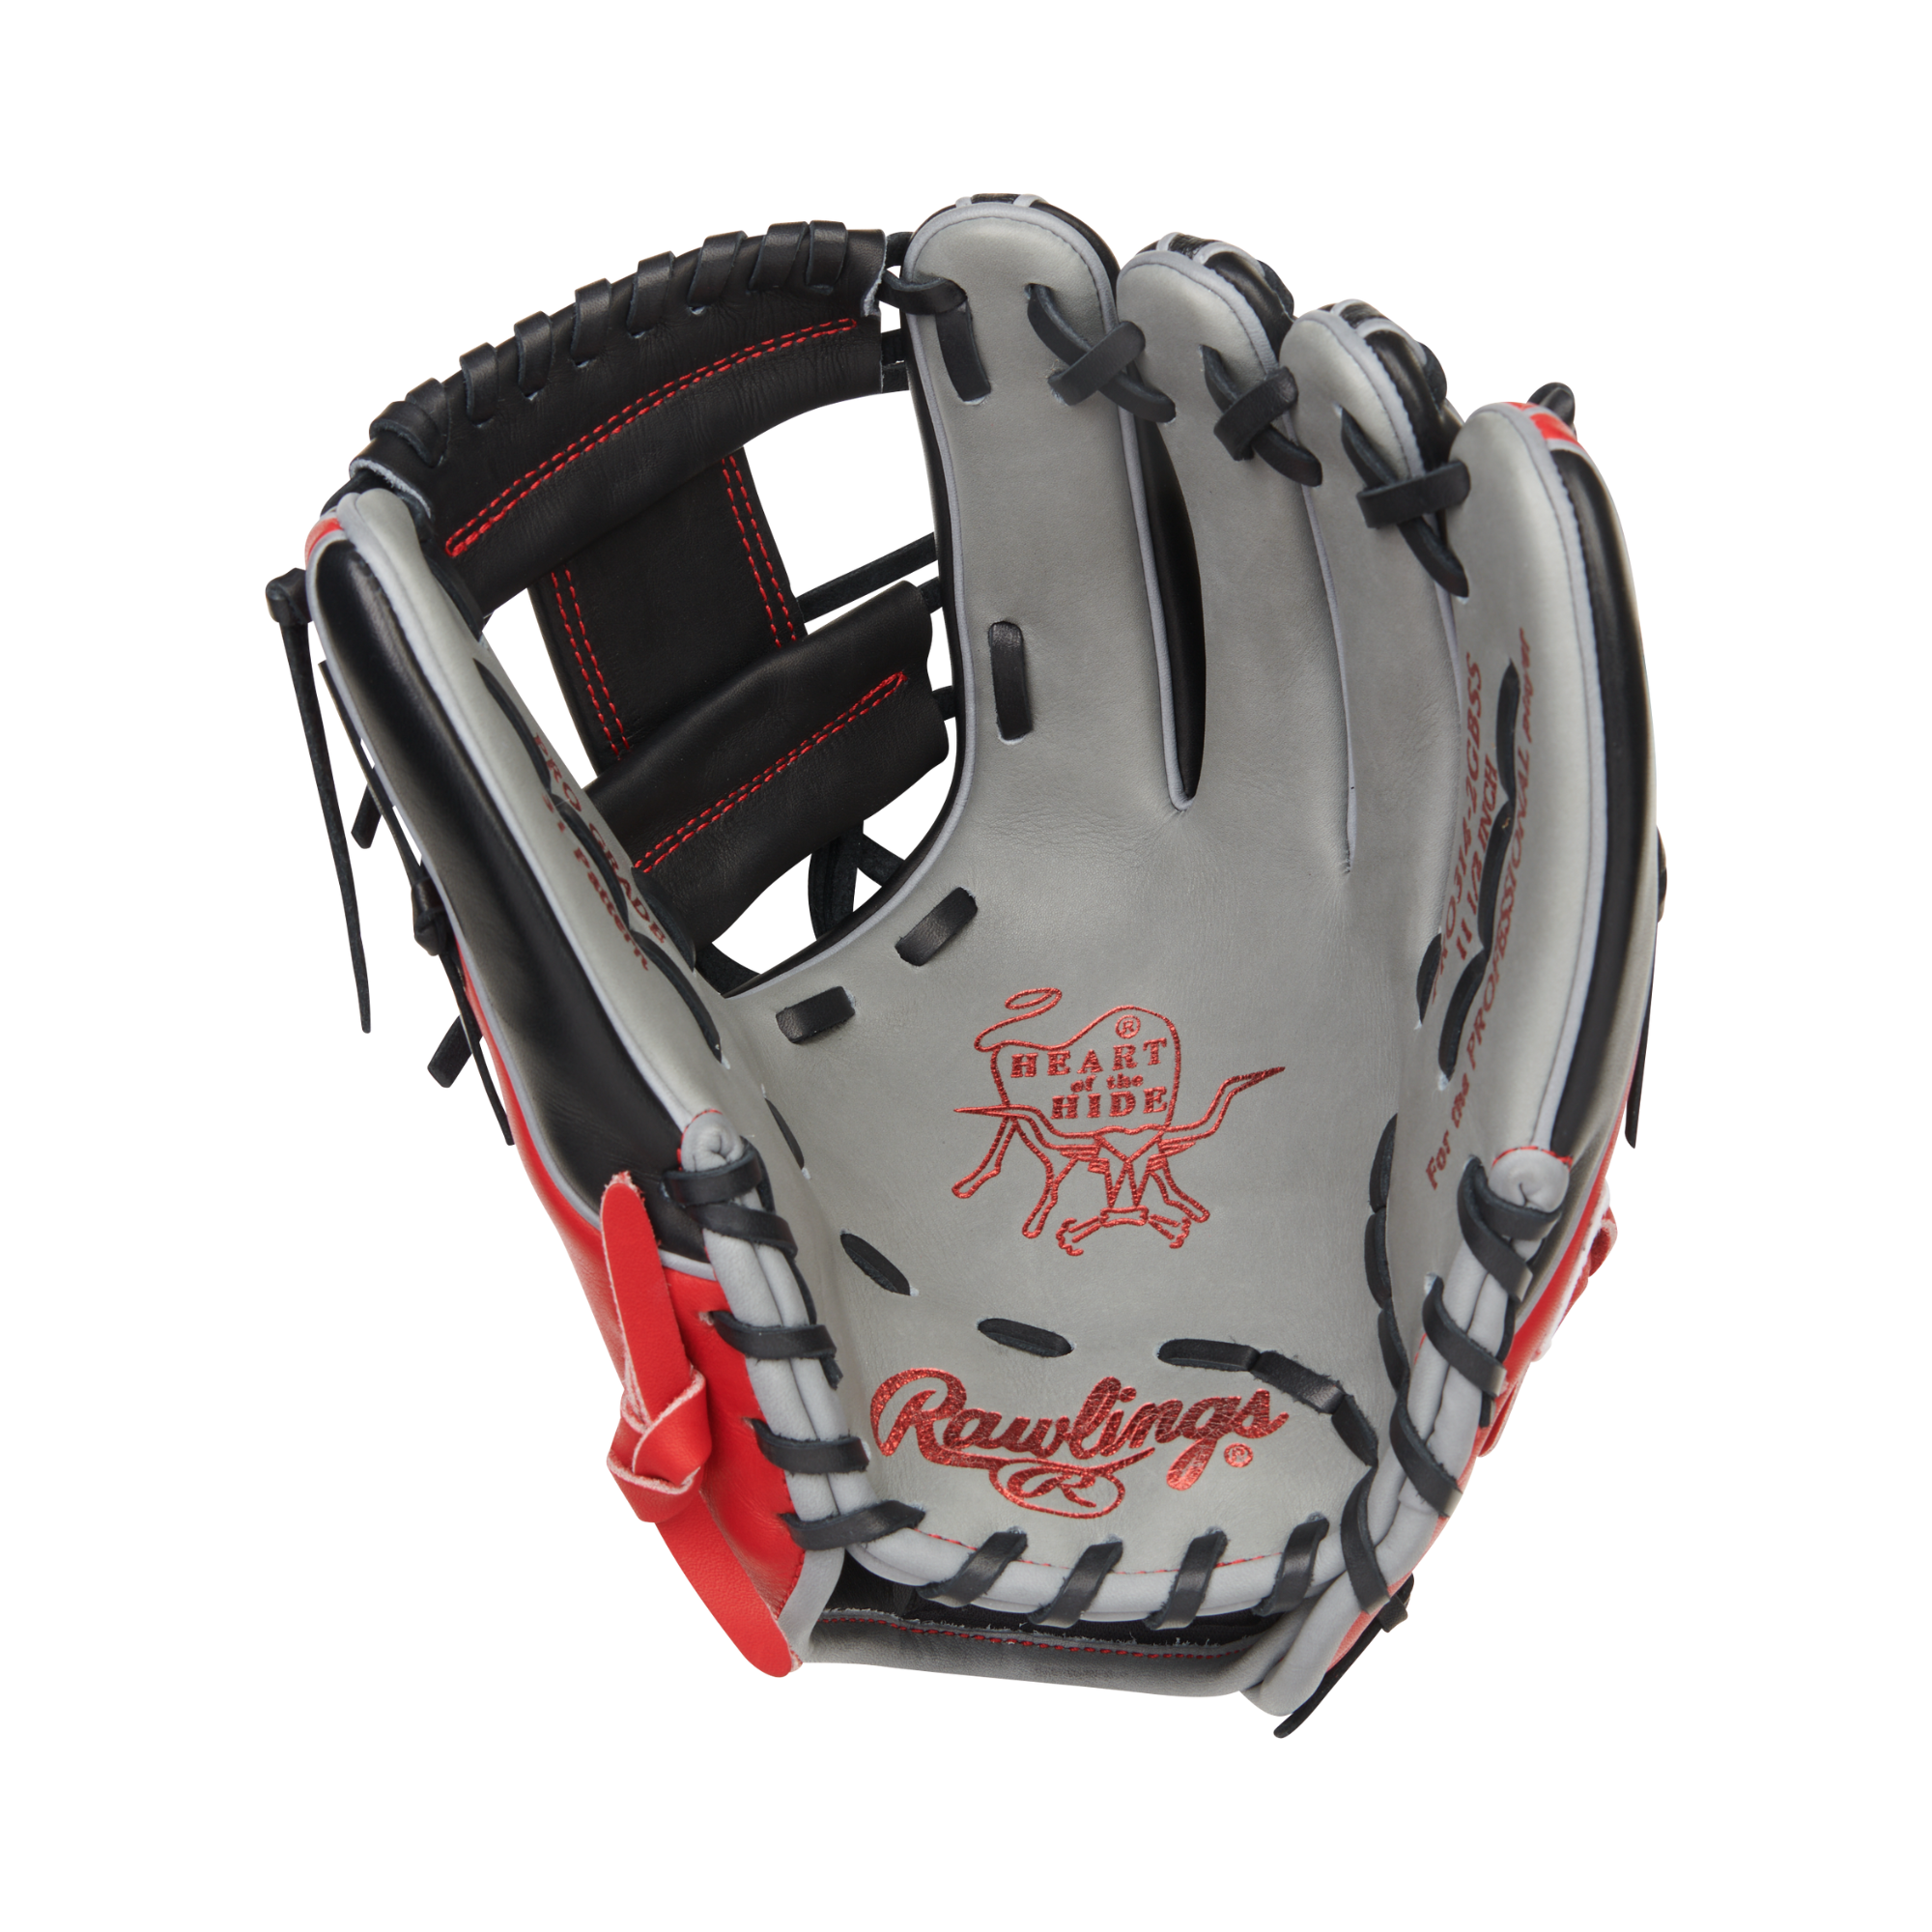 Rawlings May 2022 Gold Glove Club (GOTM) 11.75-inch Infield Heart of the Hide Red/Black/Grey